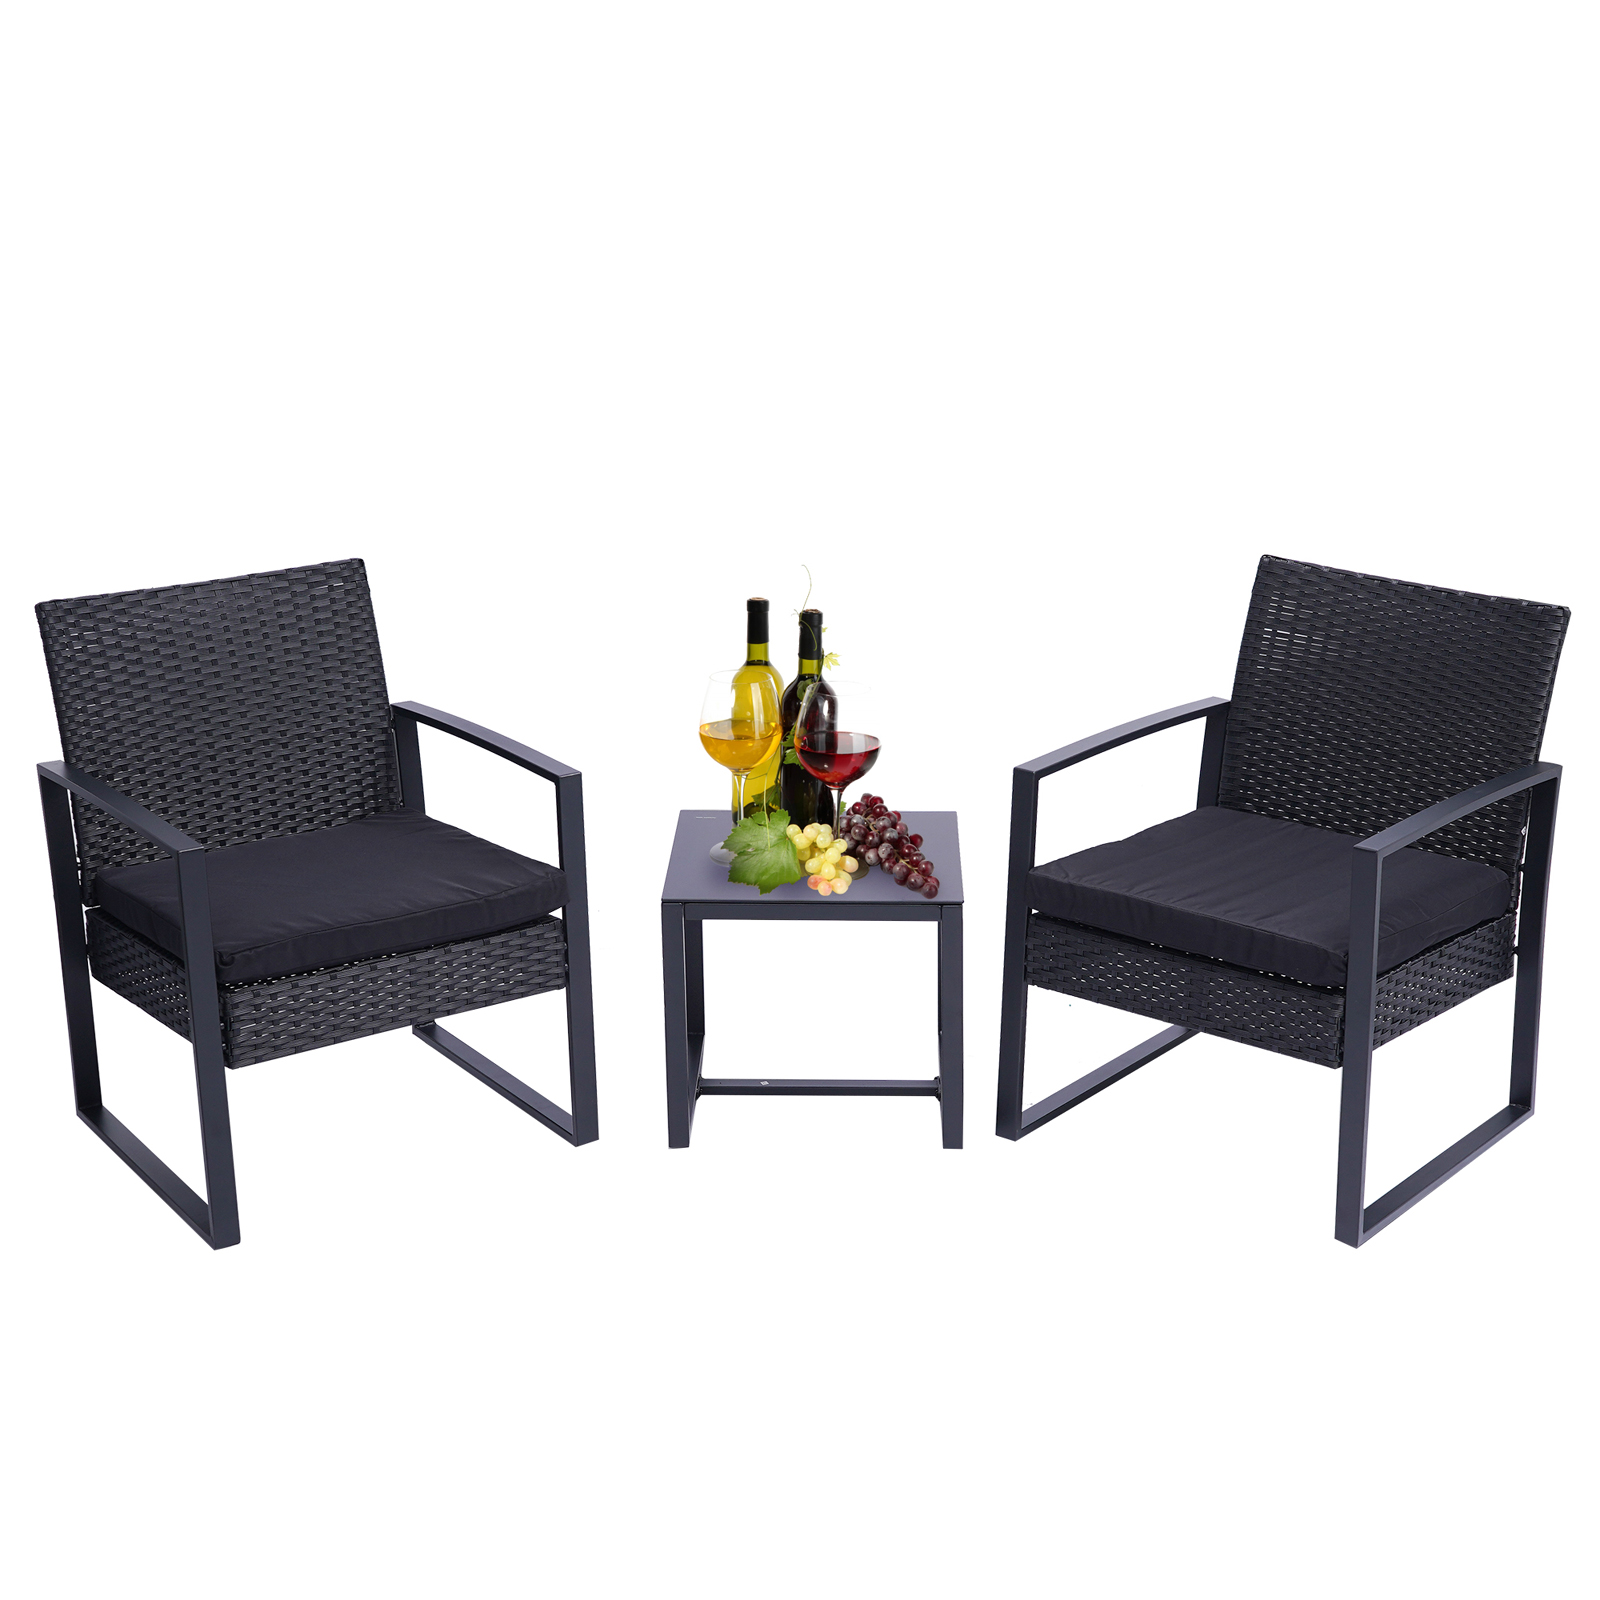 3 Pieces Patio Conversation Sets, Outdoor Rattan Patio Furniture Set with Glass Coffee Table and Removable Cushions, Modern Small Wicker Bistro Set for Porch Balcony Garden Backyard Poolside - image 1 of 7